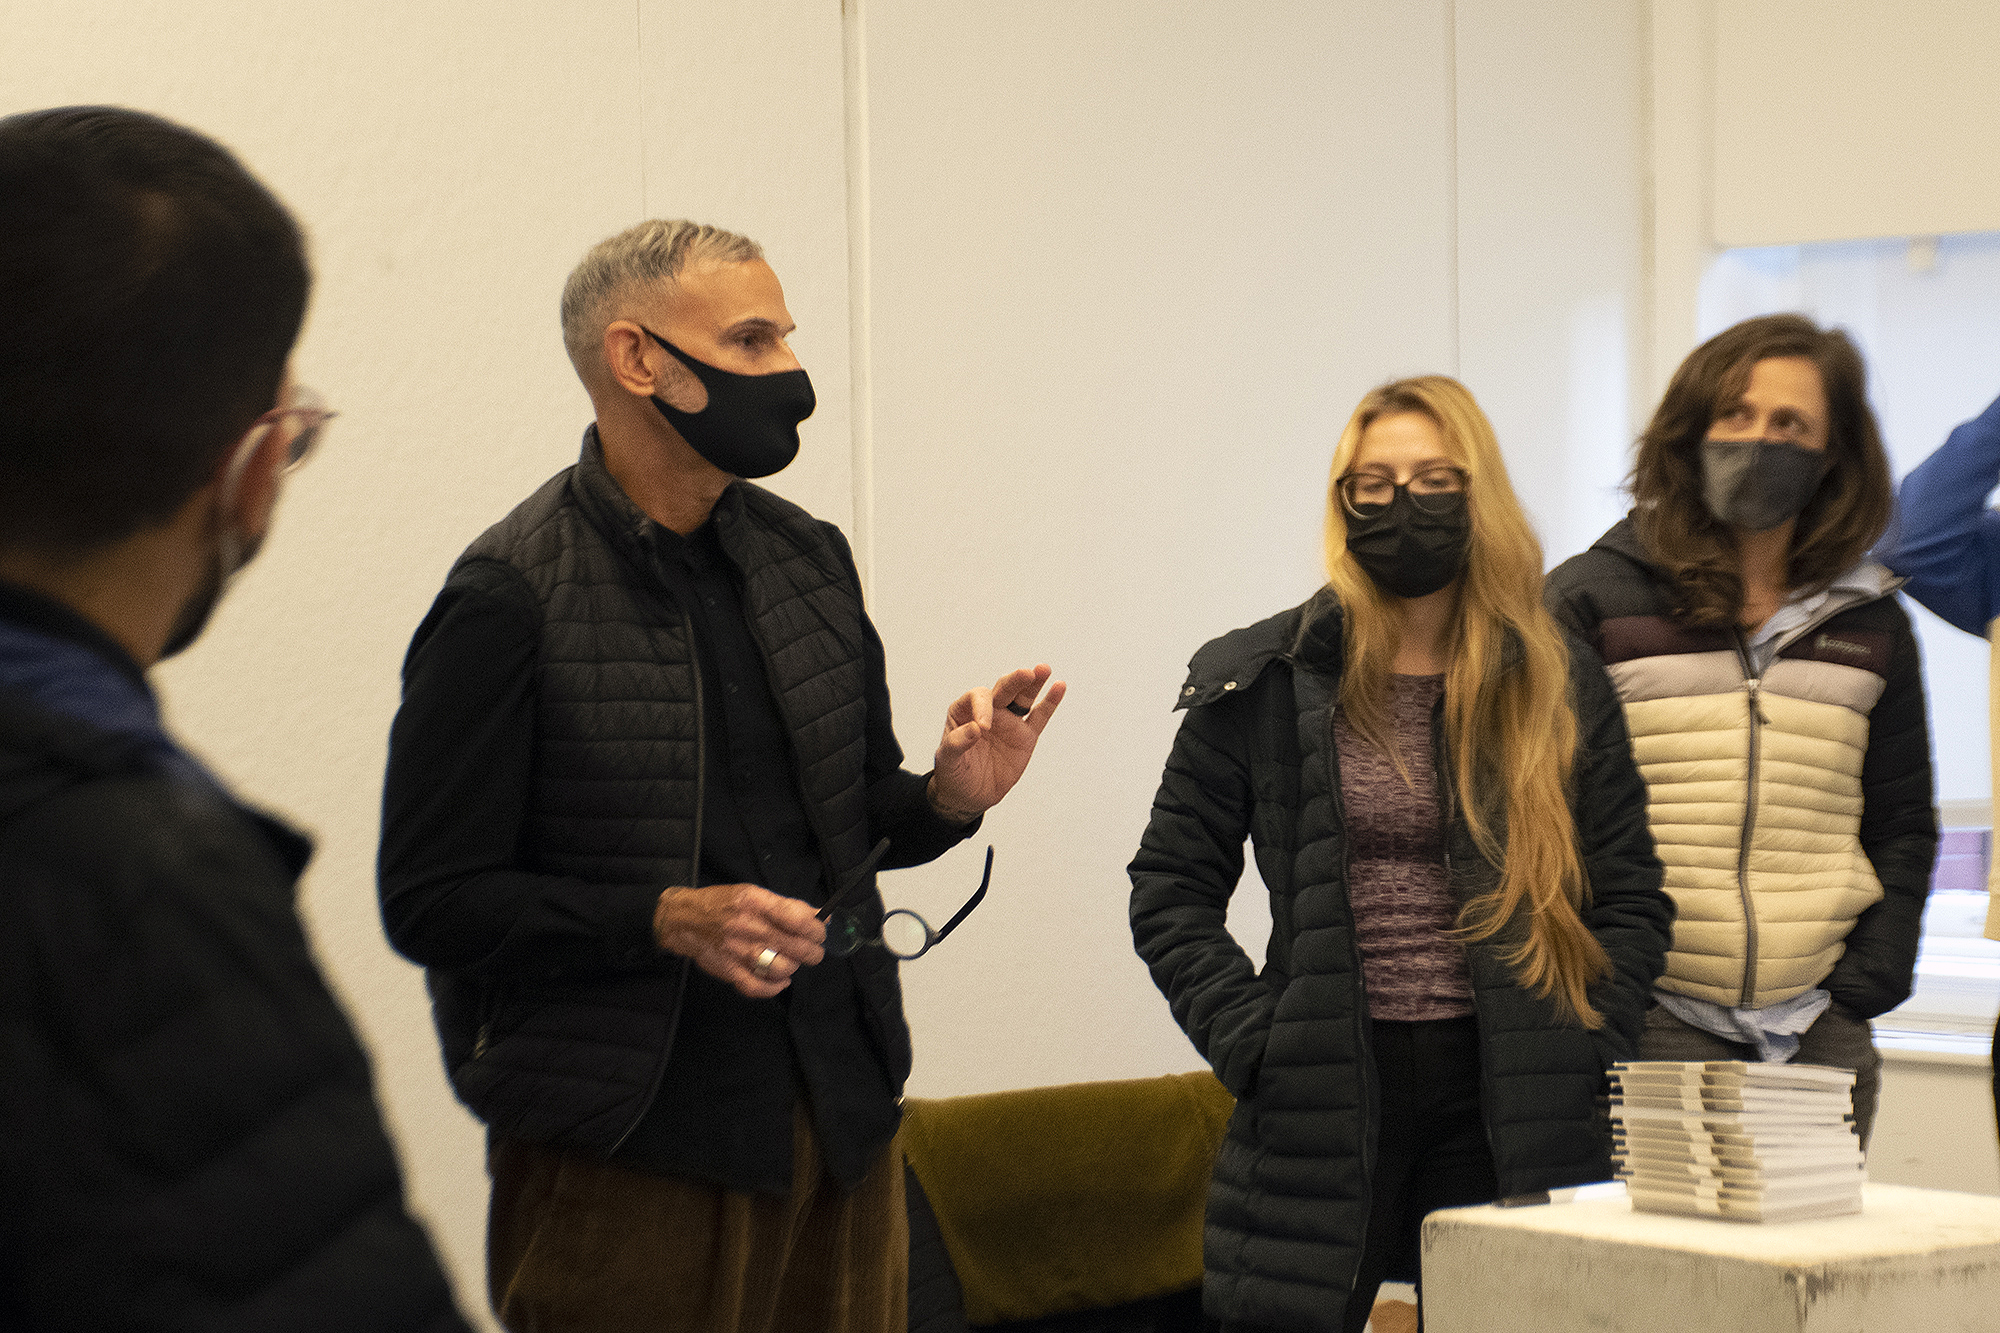 People in masks talk about an exercise in listening